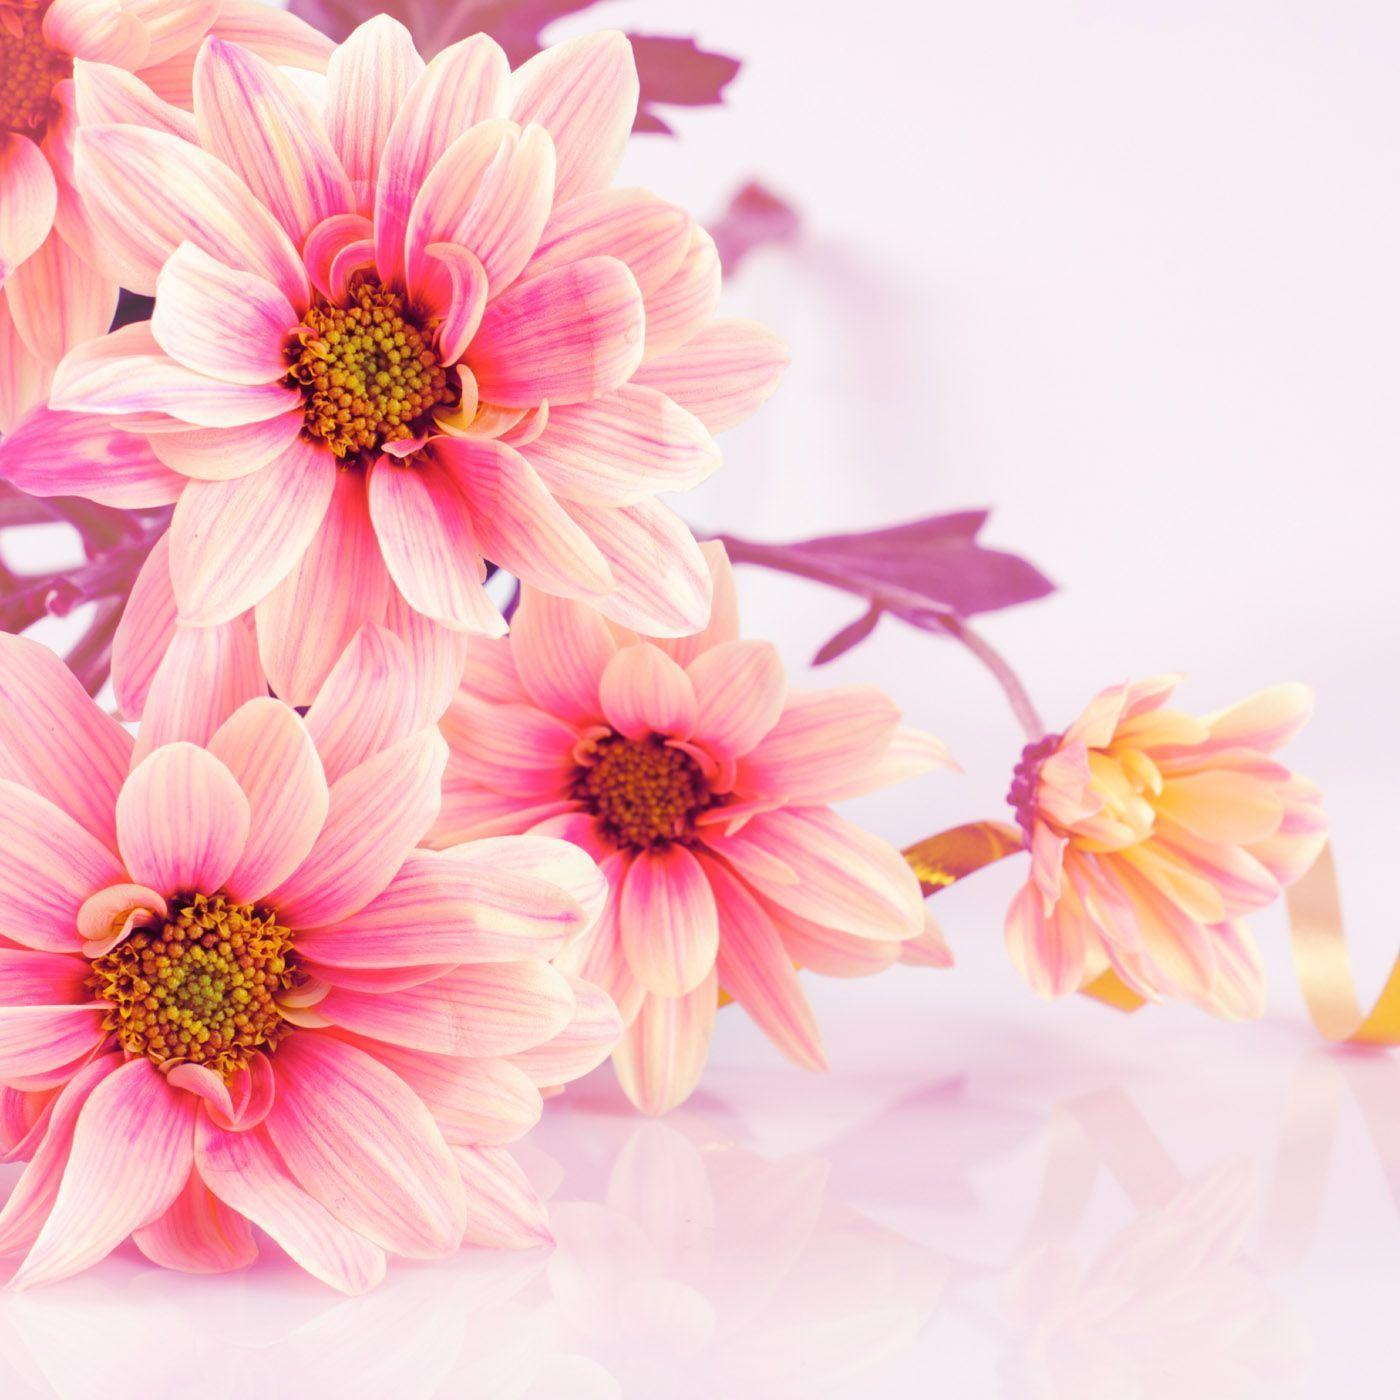 Flowers wallpapers 31143